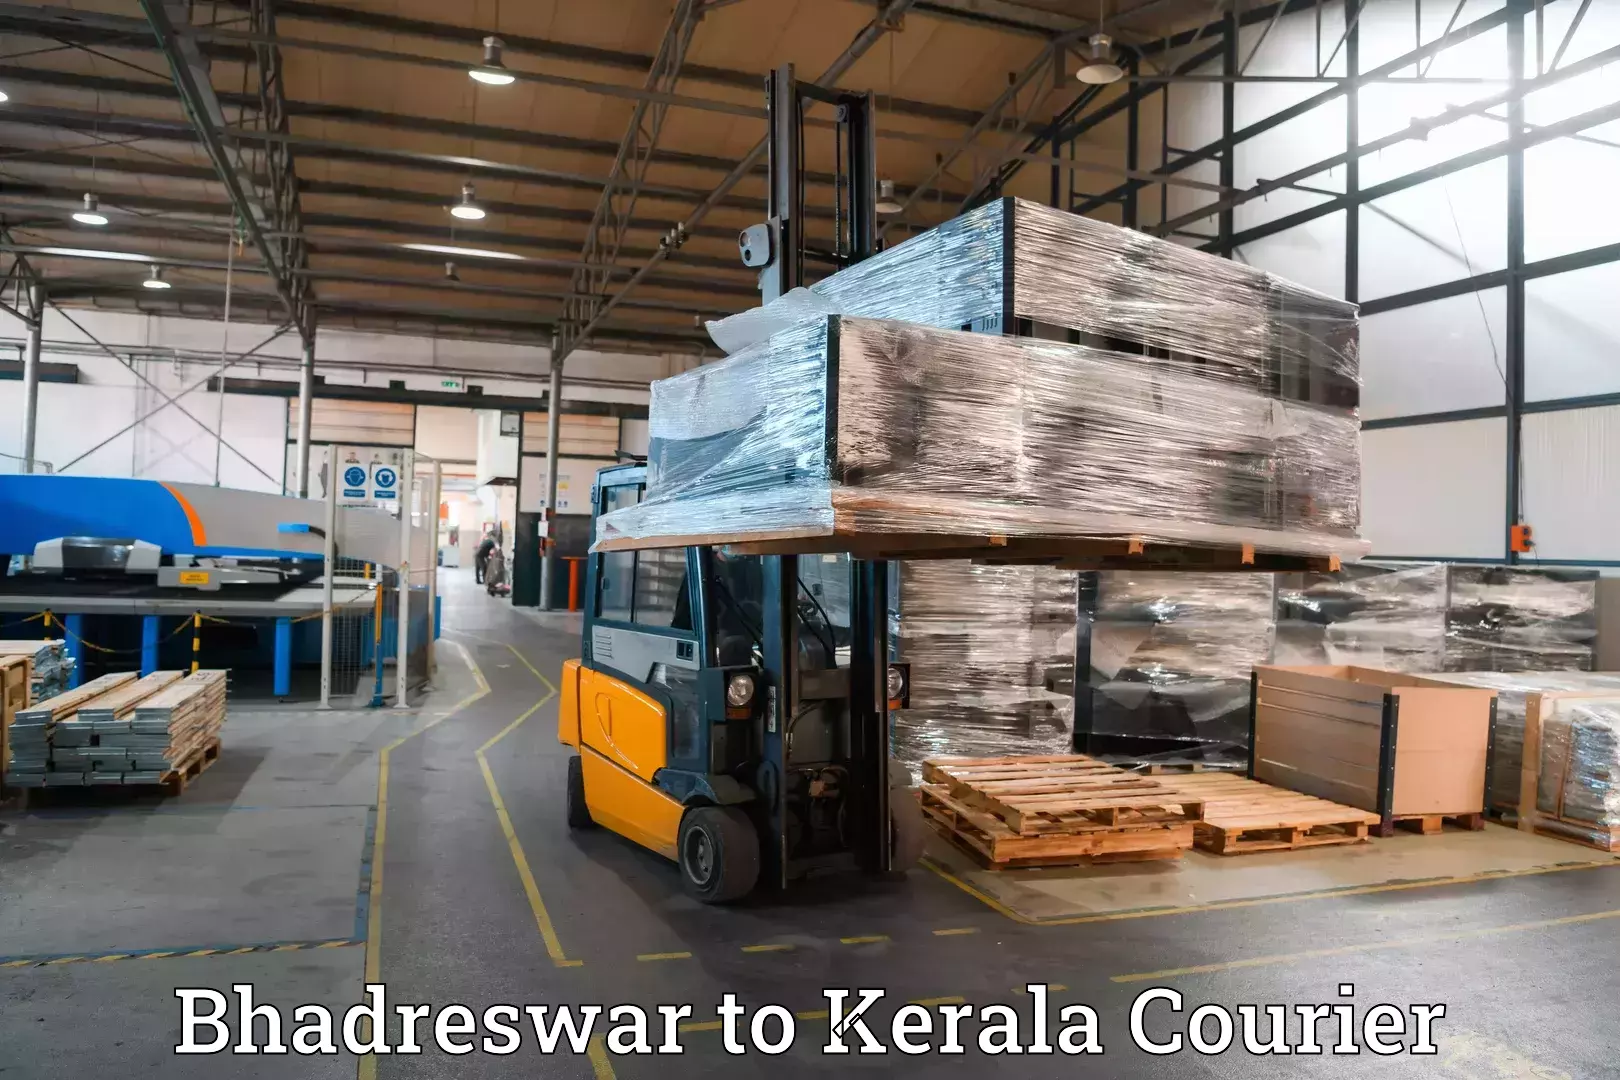 Luggage transport consulting Bhadreswar to Kerala